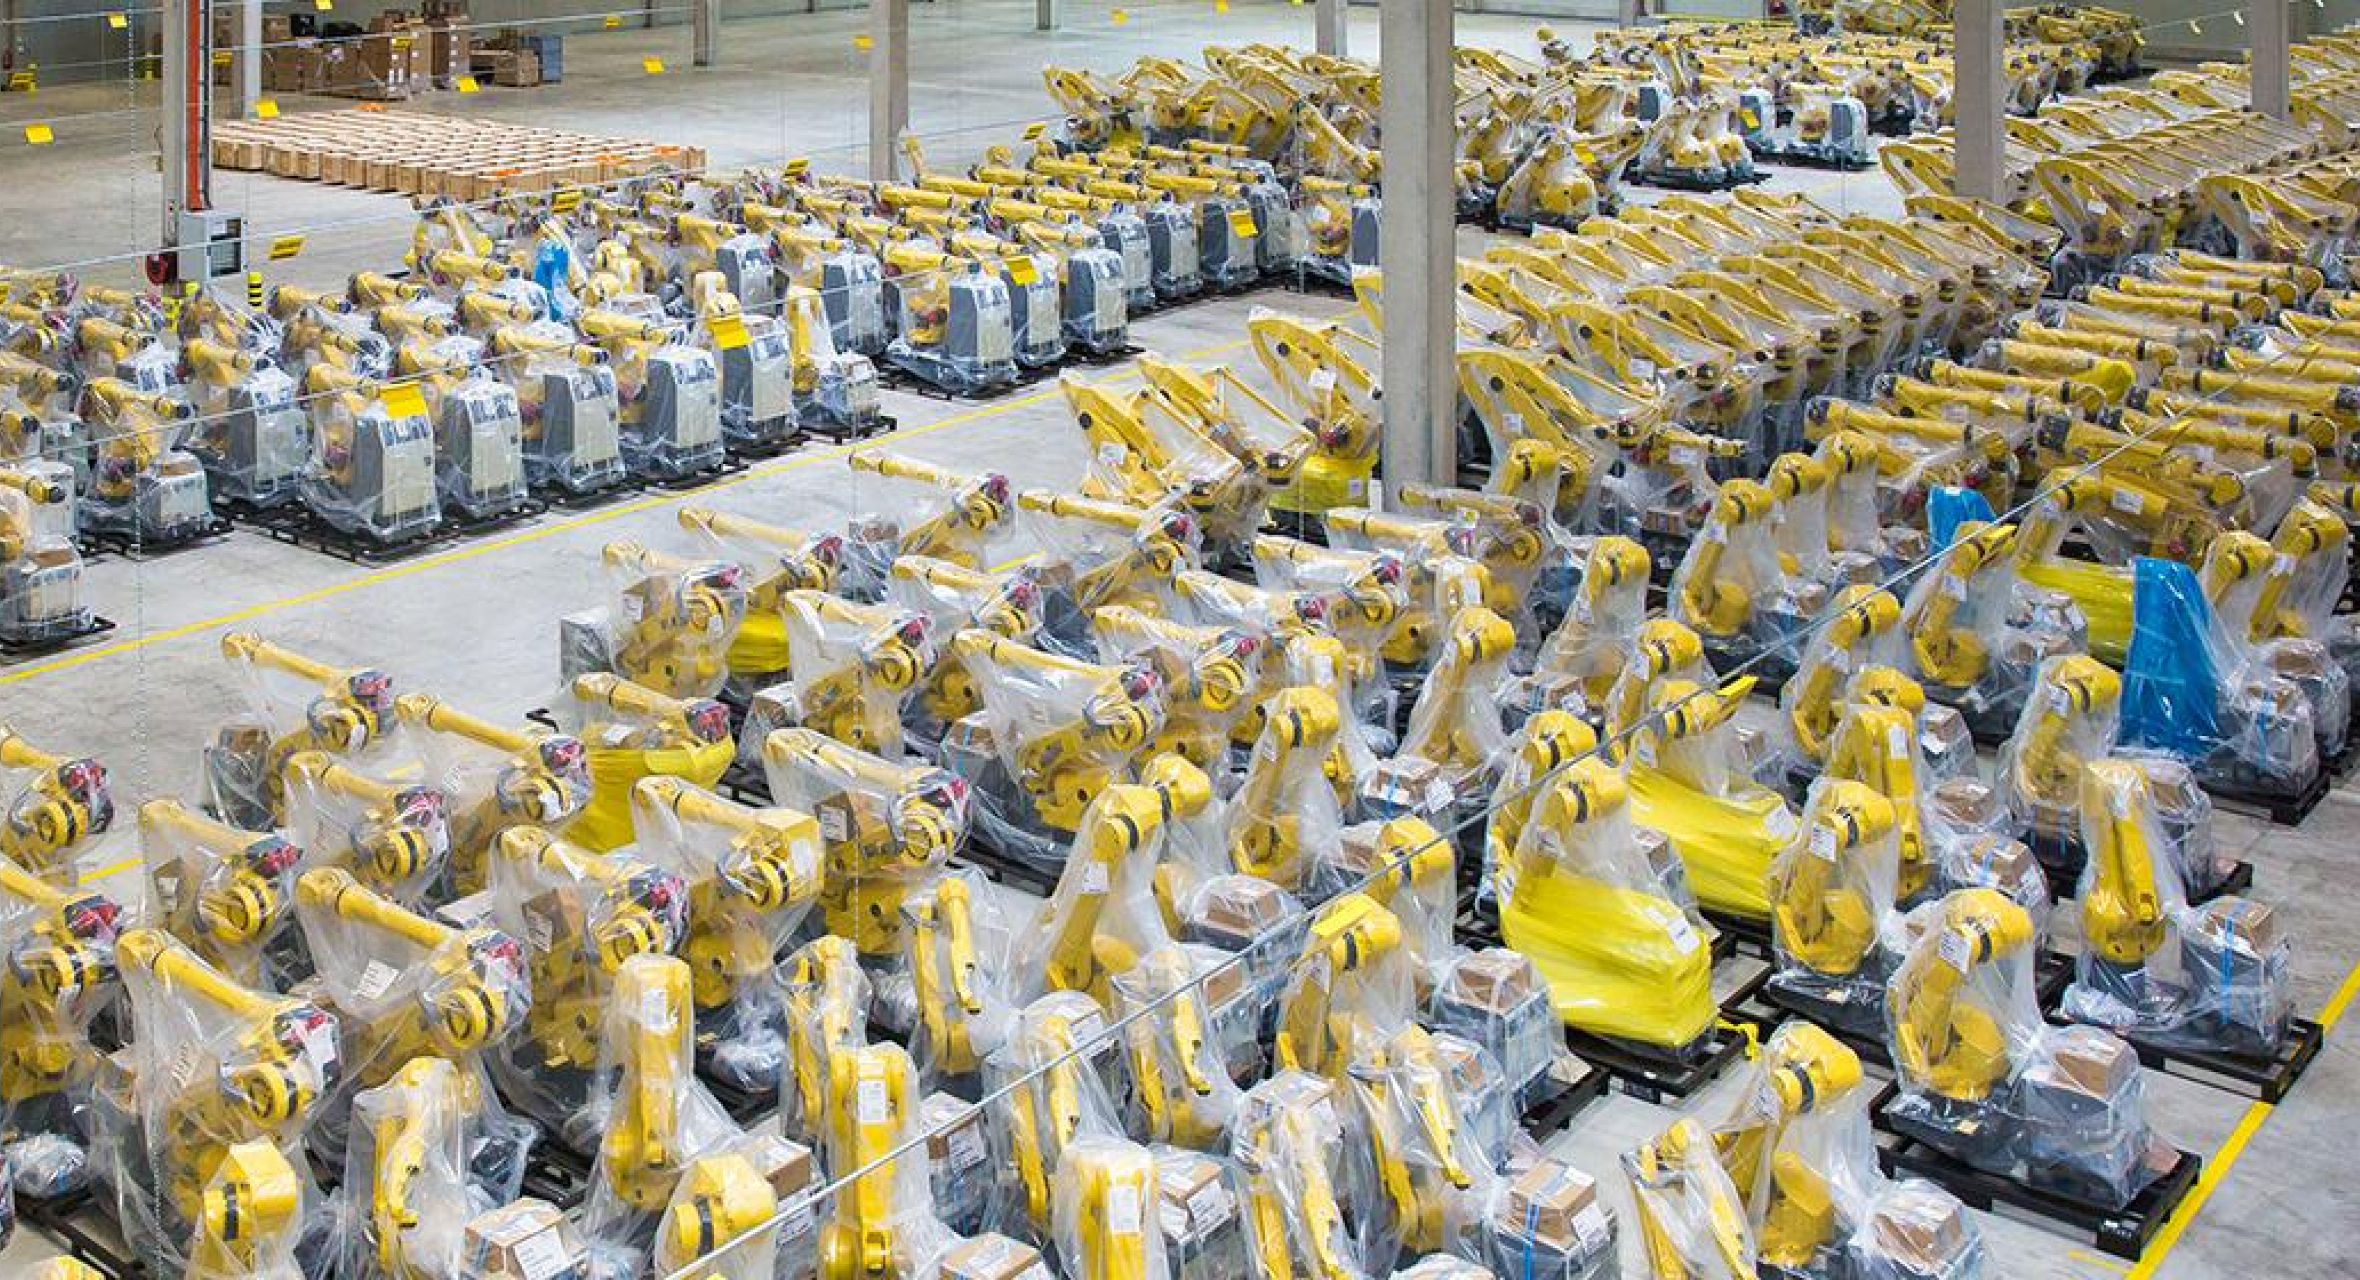 FANUC Ltd warehouse with multiple rows of yellow machinery